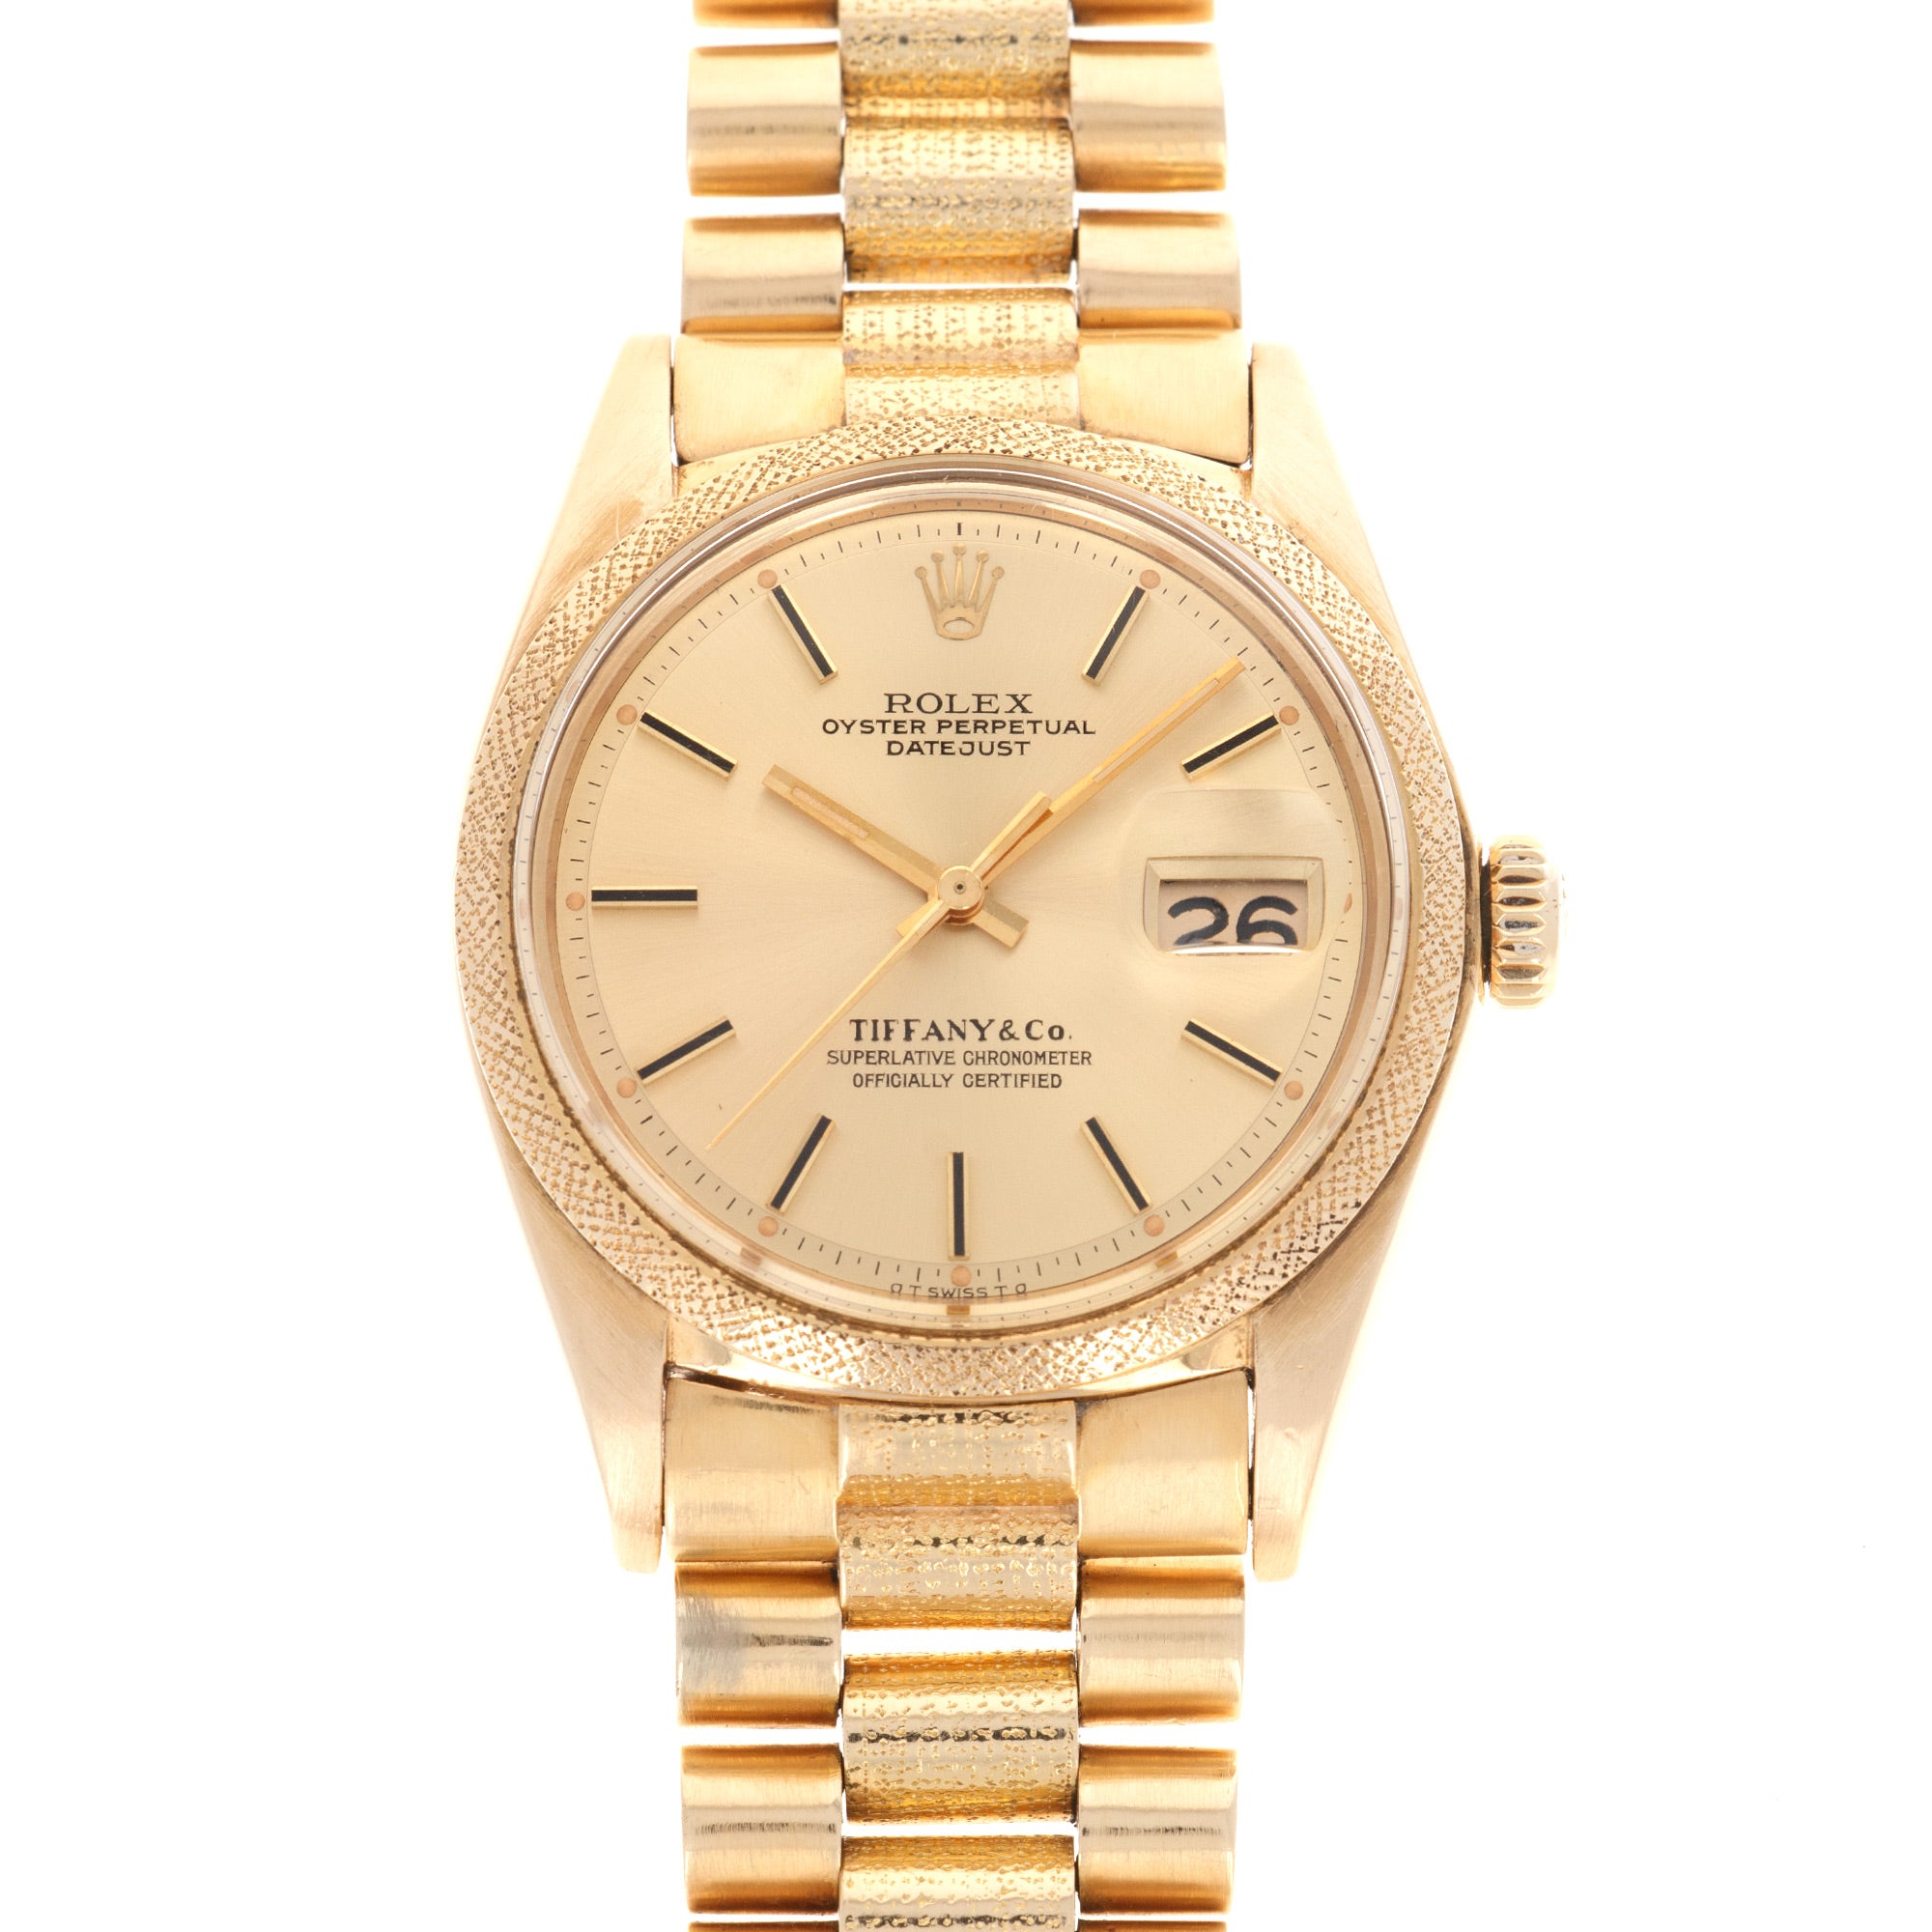 Rolex - Rolex Yellow Gold Datejust Watch Ref. 1611, Retailed by Tiffany & Co. - The Keystone Watches